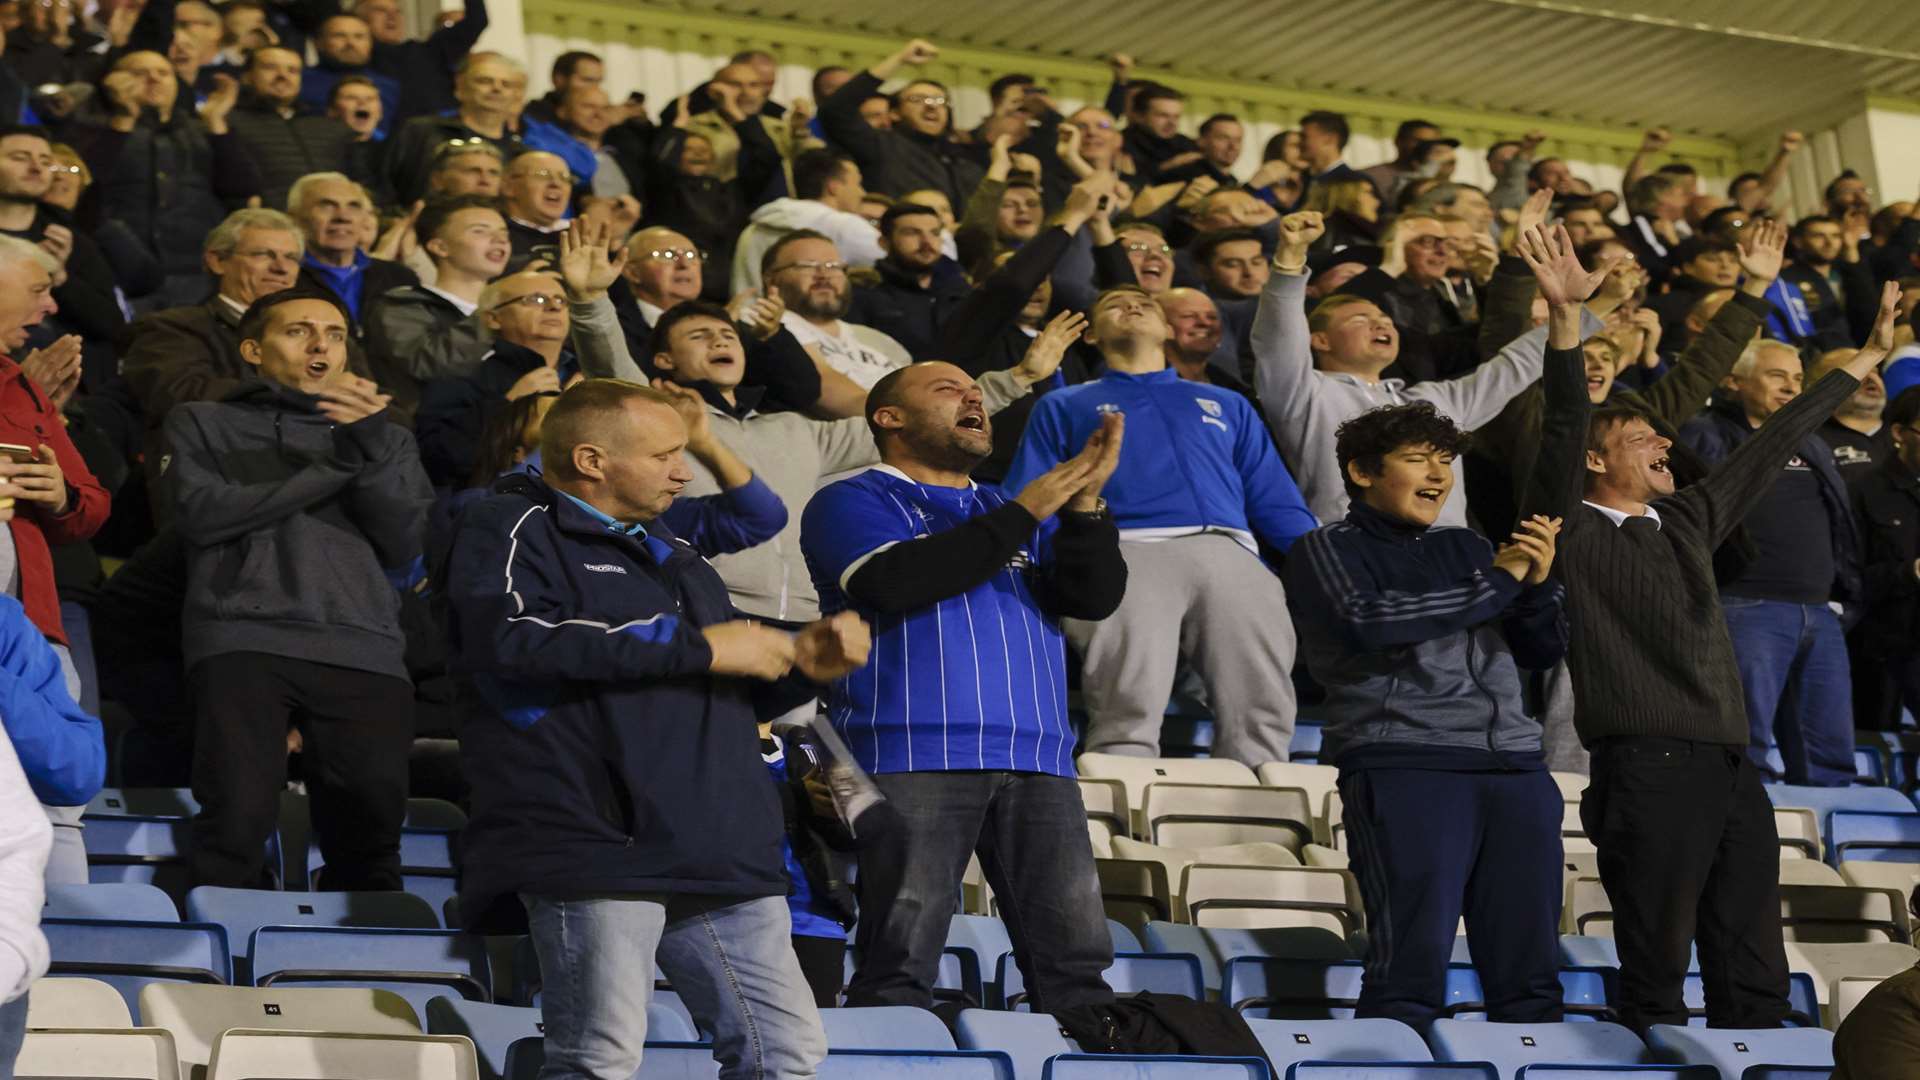 Fans celebrate a Gills goal from Tom Eaves Picture: Andy Payton